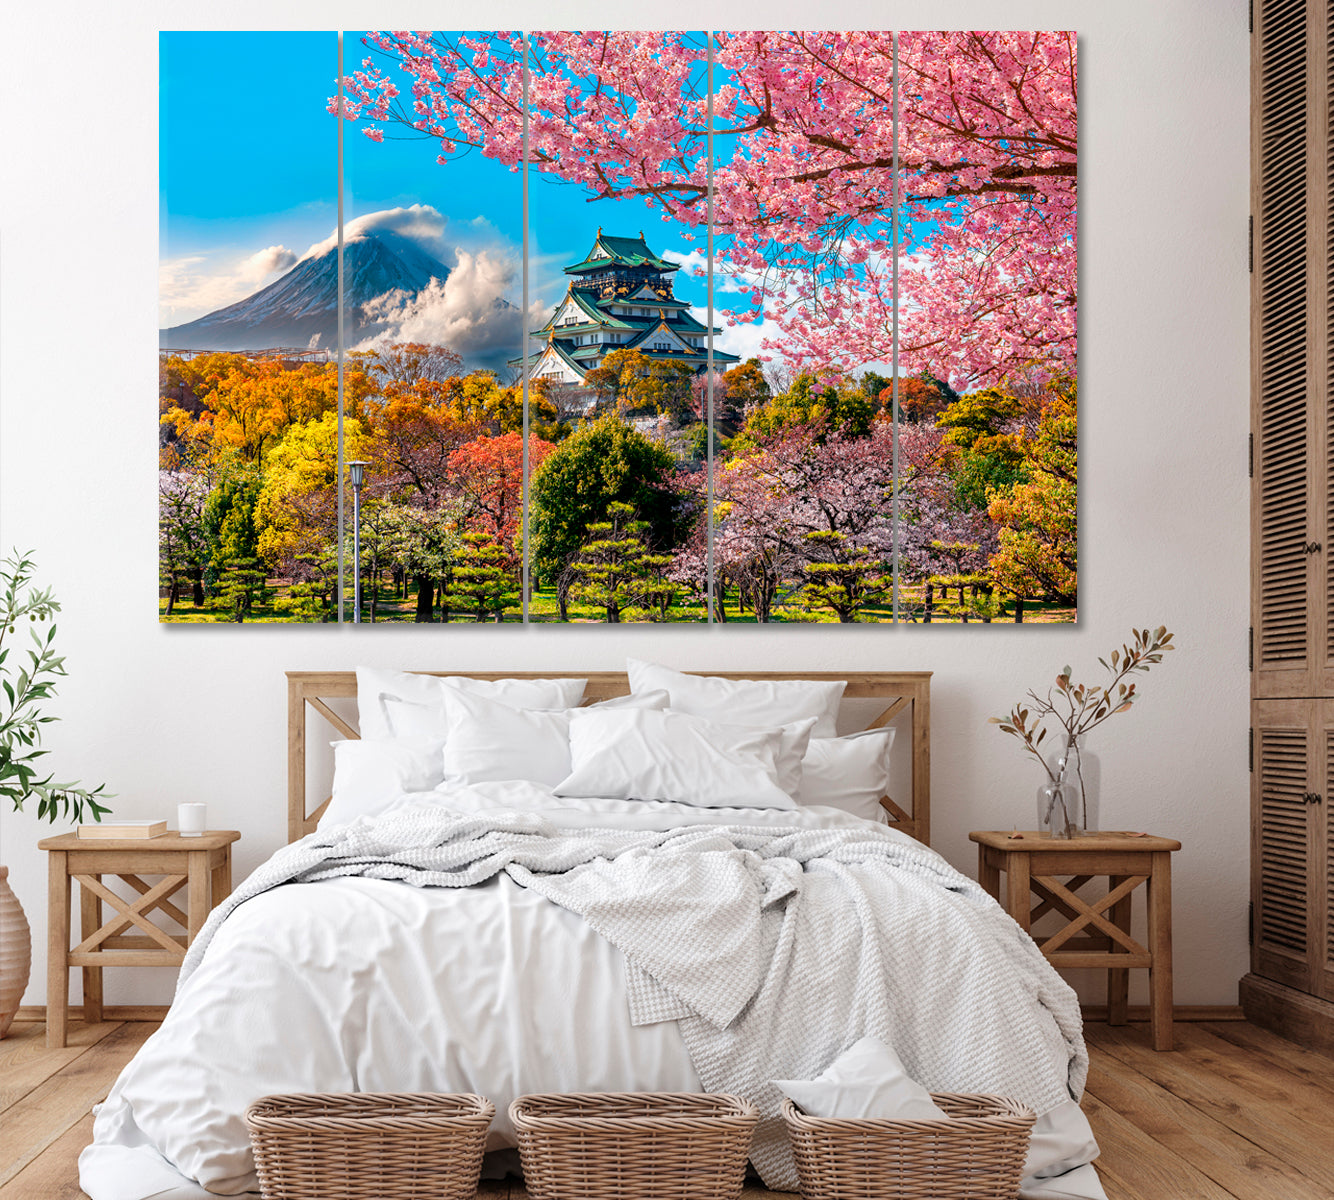 Osaka Castle with Fuji Mountain Japan Canvas Print ArtLexy 5 Panels 36"x24" inches 